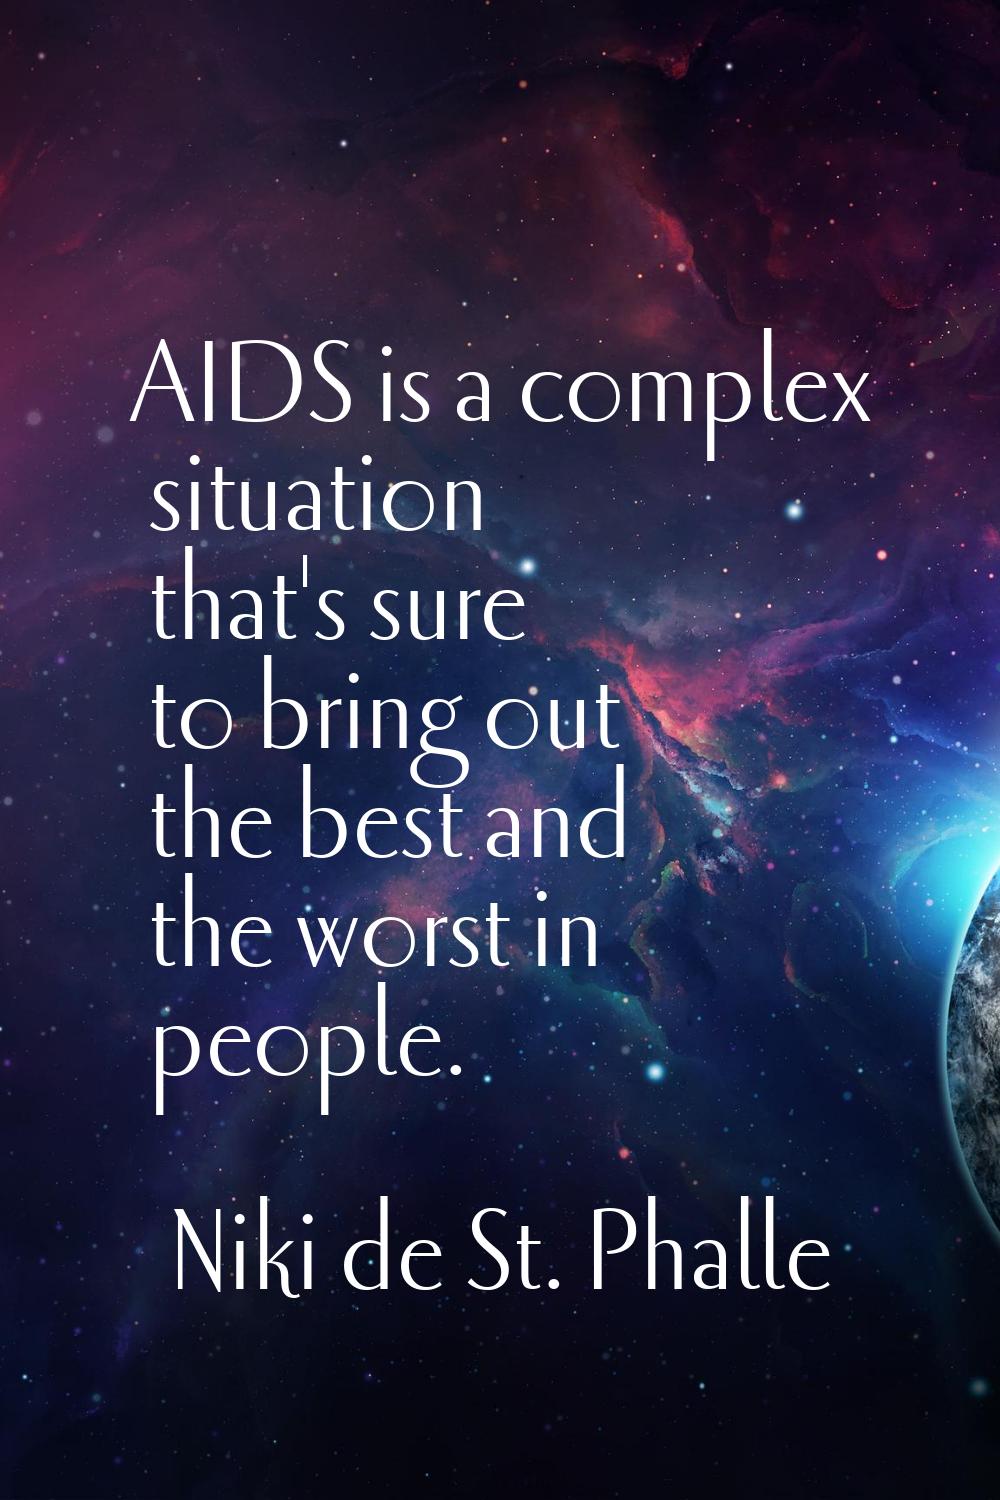 AIDS is a complex situation that's sure to bring out the best and the worst in people.